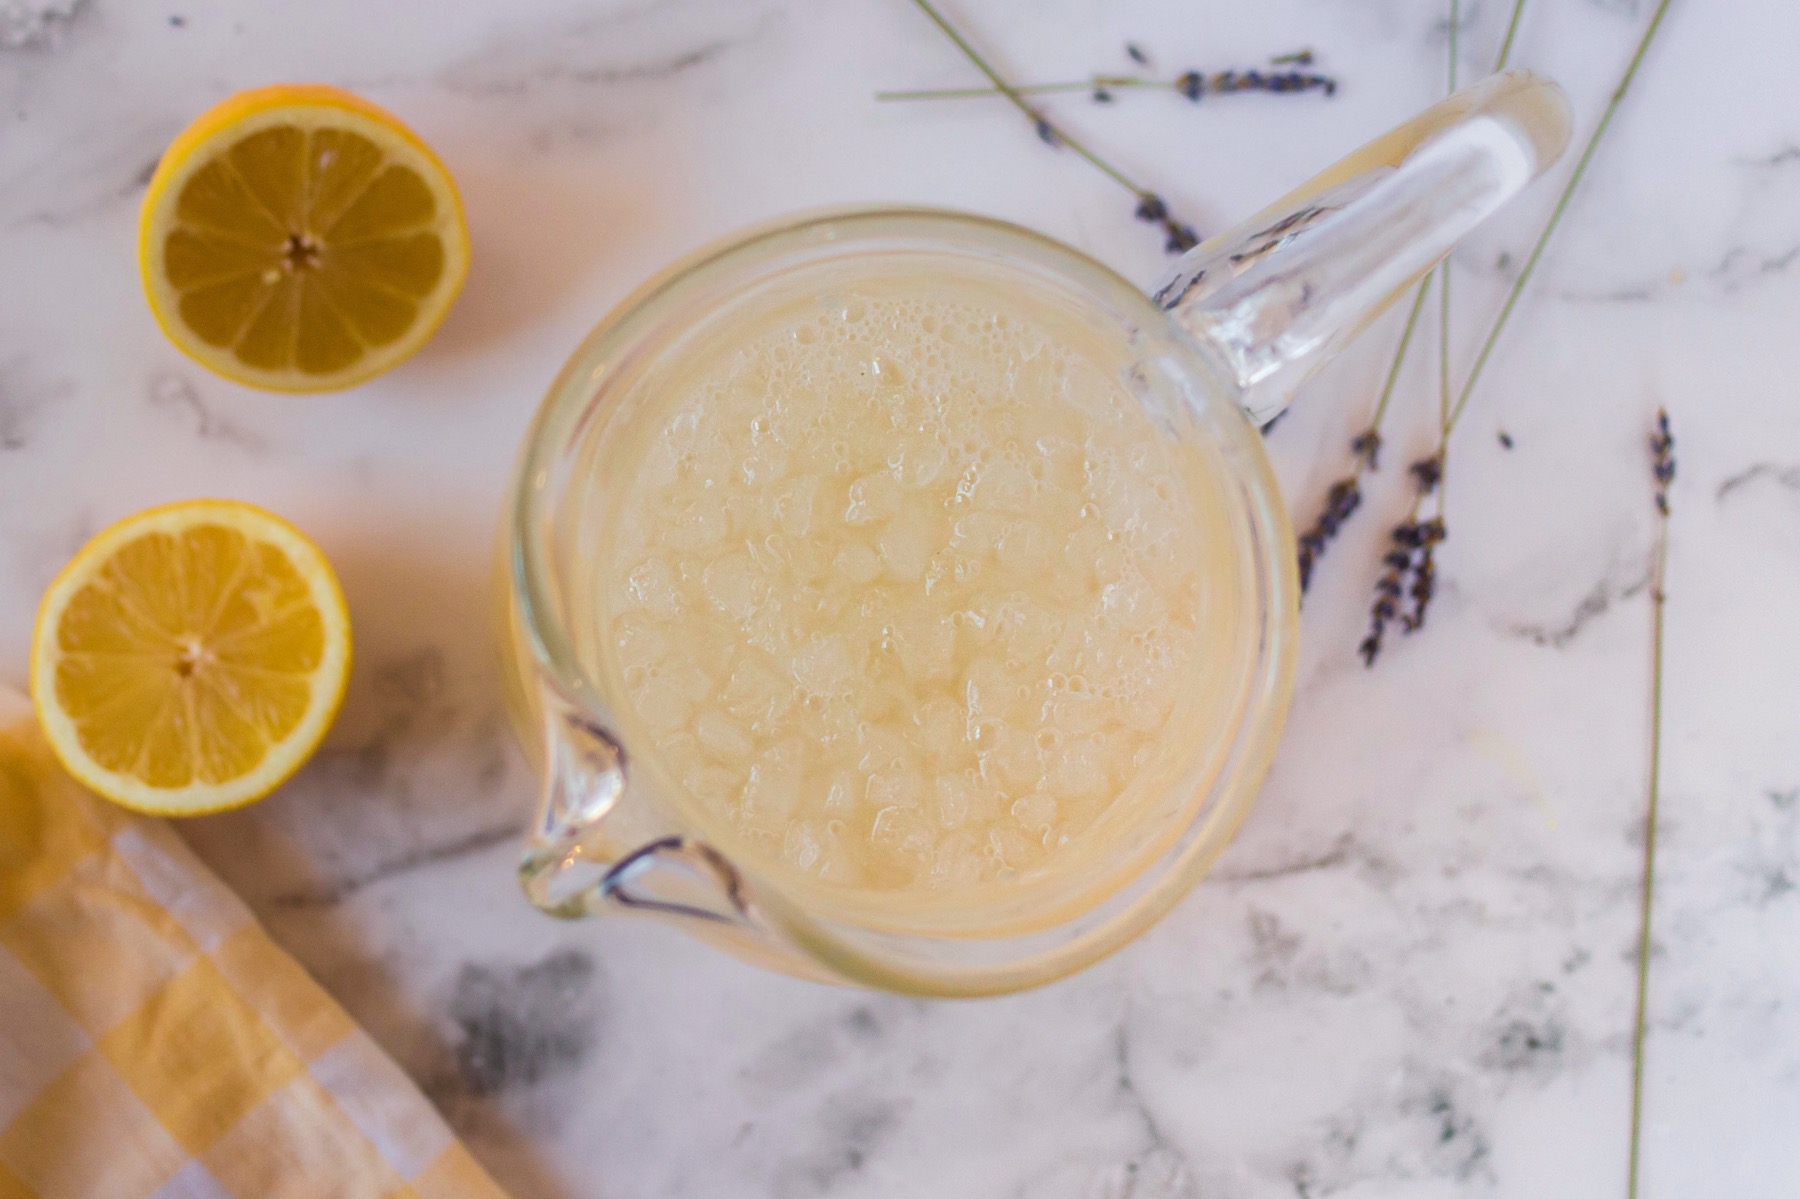 add ice to the finished lavender lemonade recipe